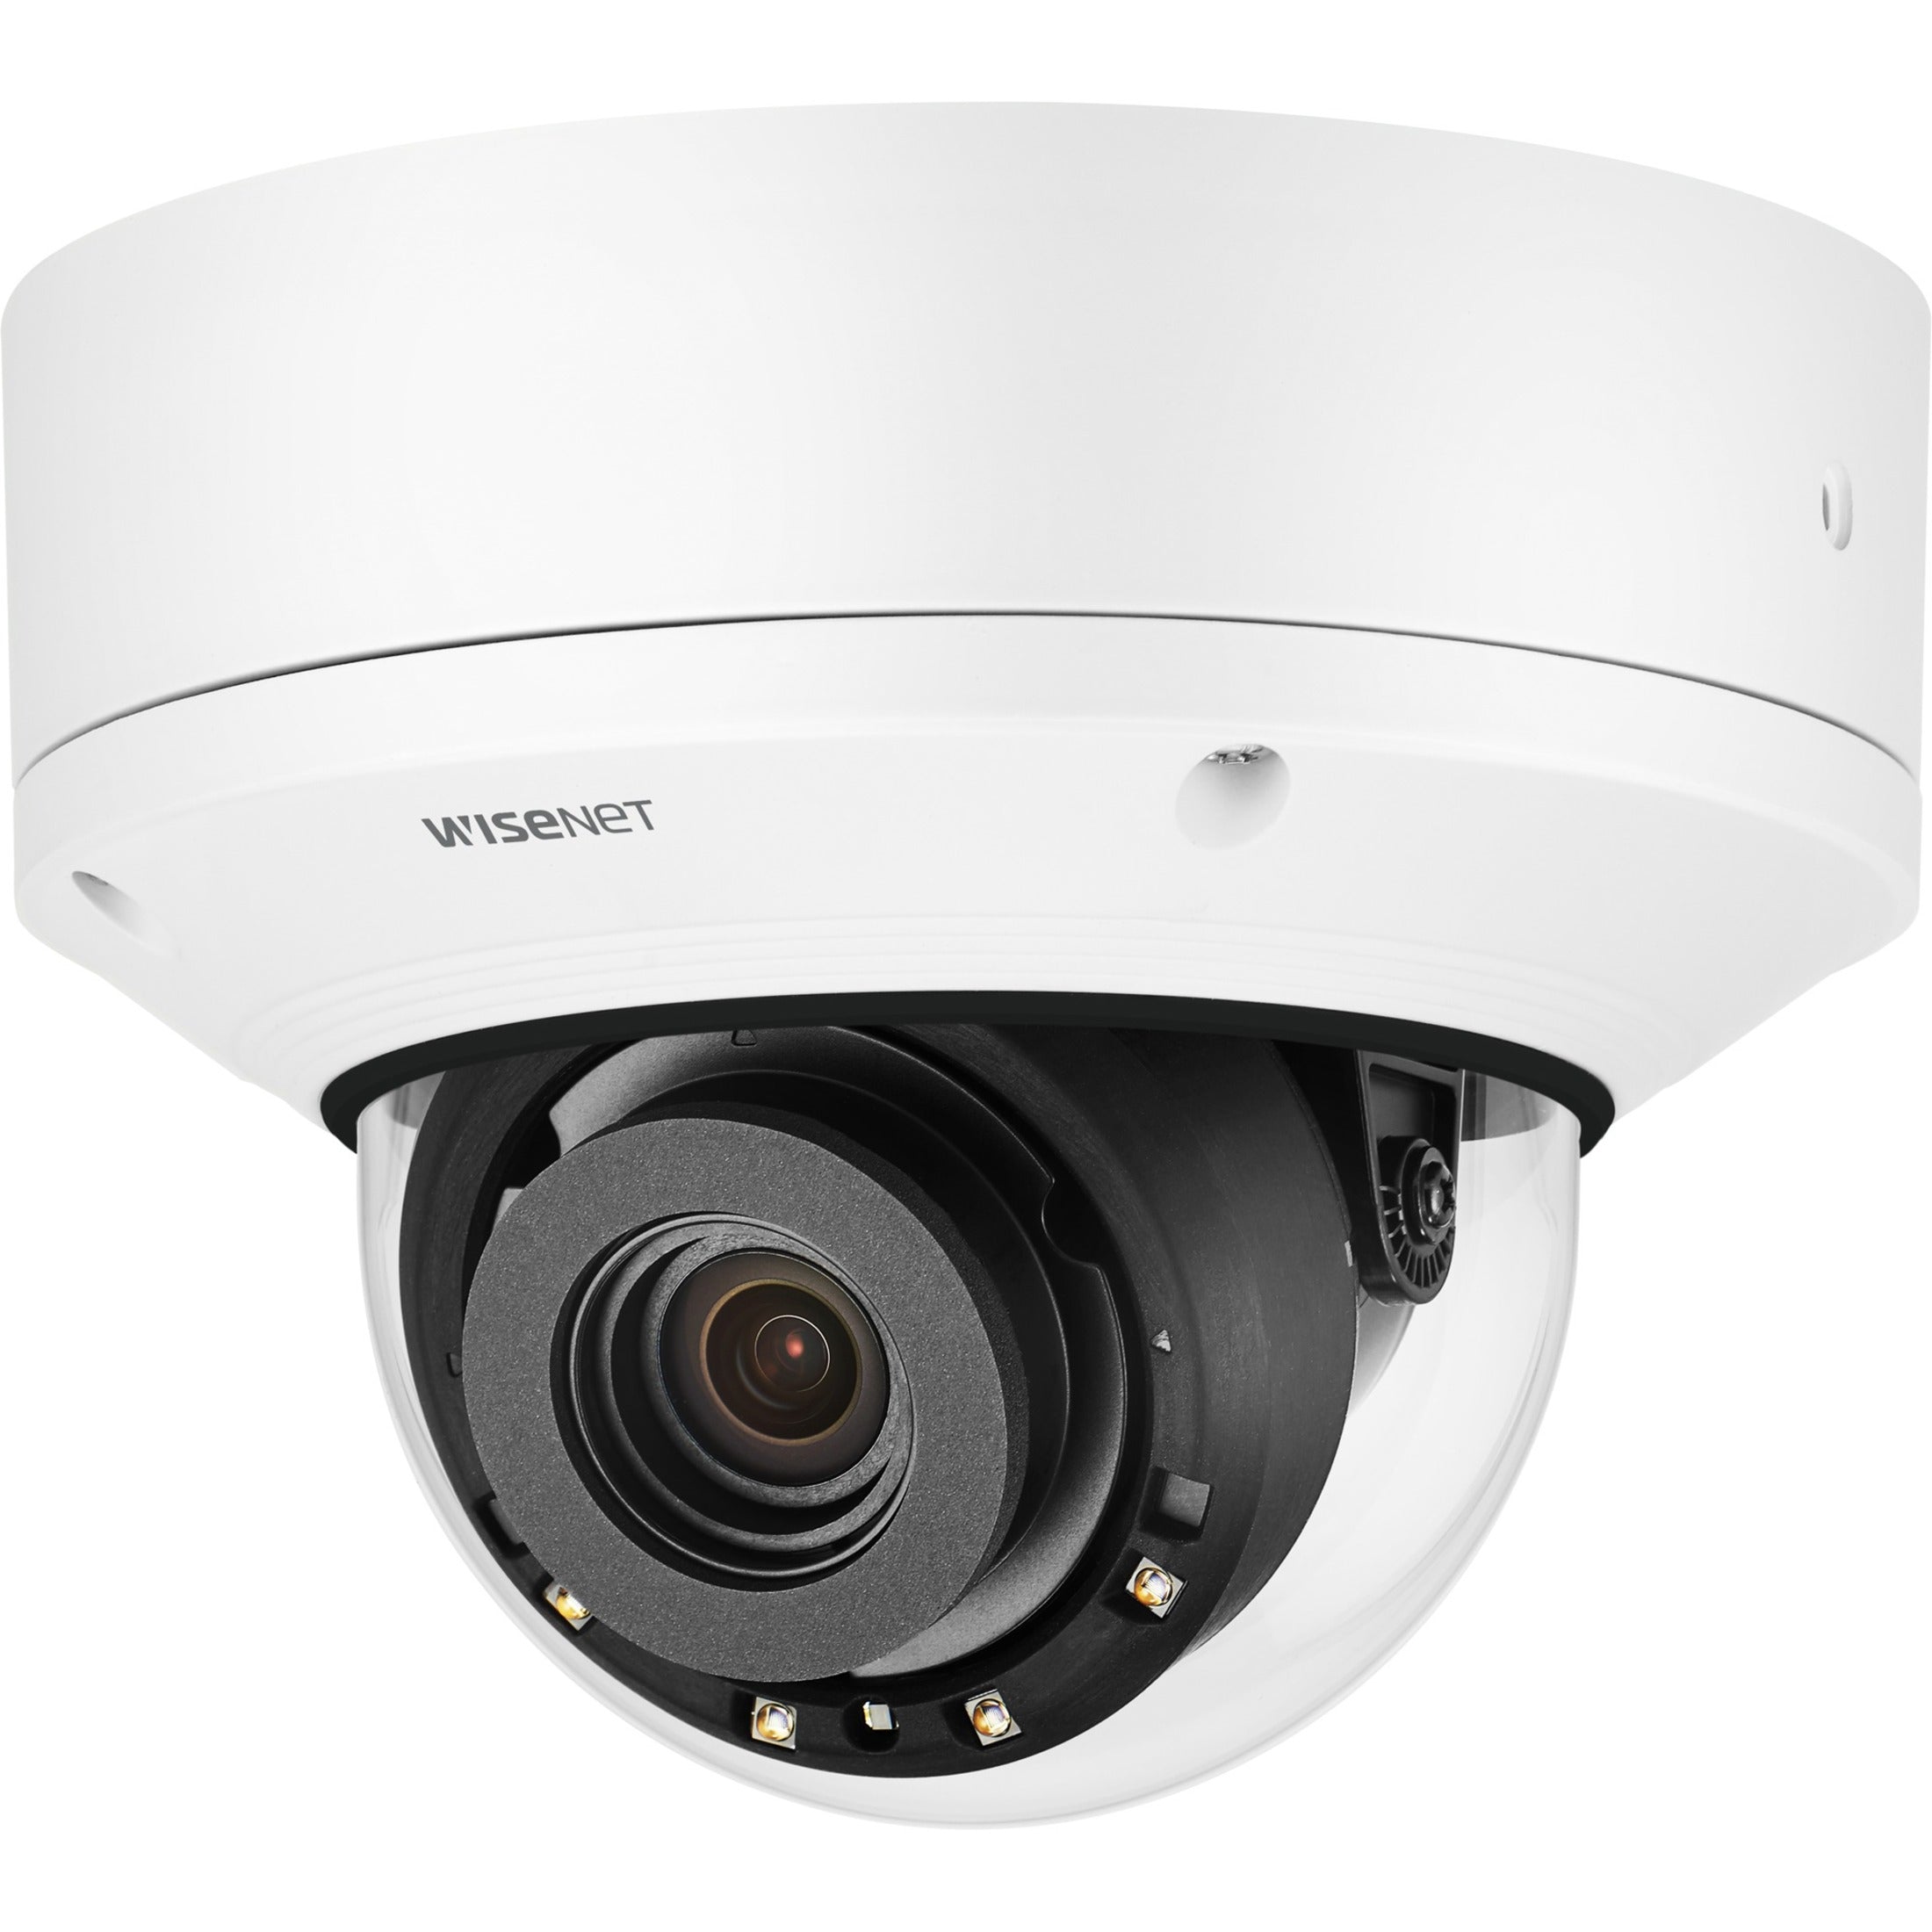 Wisenet XND-8082RV 6MP Network IR Dome Camera, Indoor Security Surveillance, Motion Detection, Night Vision, 3x Optical Zoom